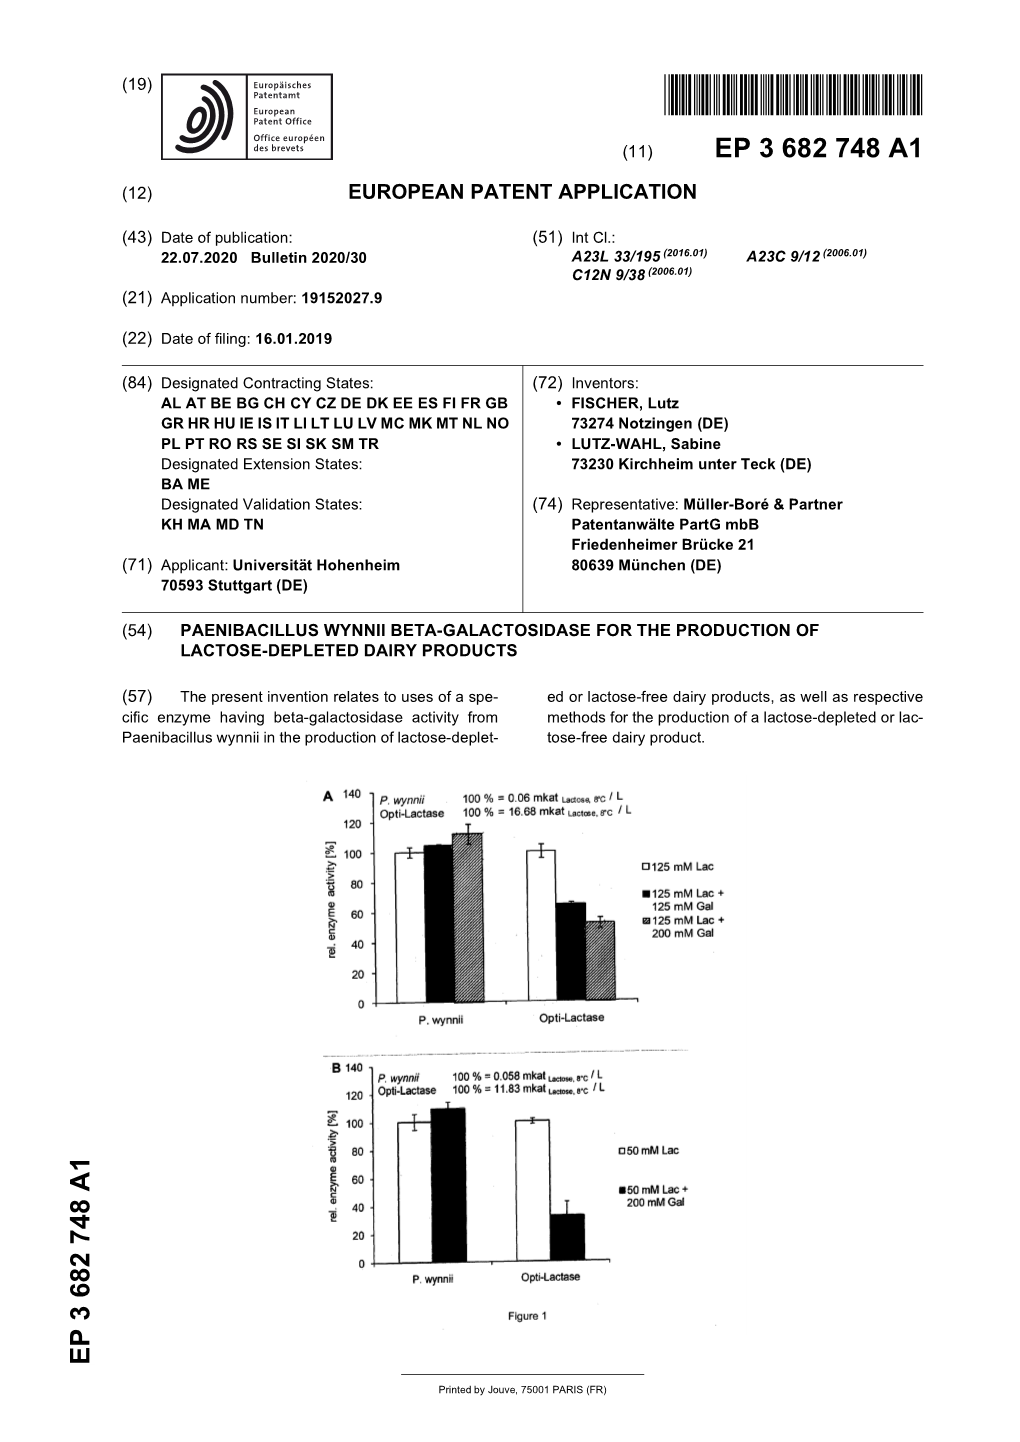 Paenibacillus Wynnii Beta-Galactosidase for the Production of Lactose-Depleted Dairy Products